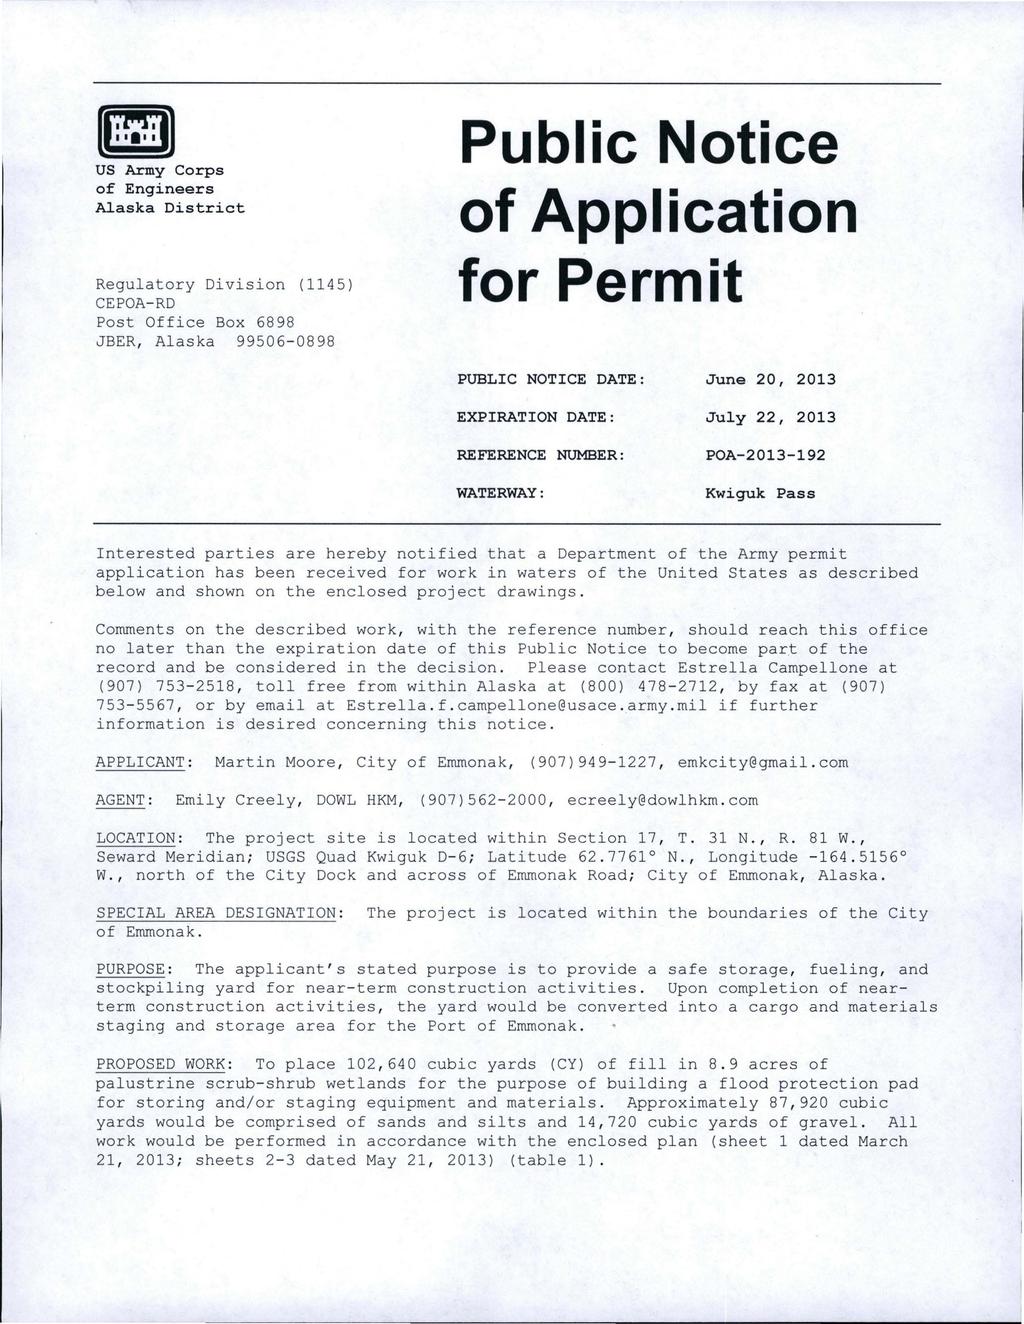 US Army Corps of Engineers Alaska District Regulatory Division (1145) CEPOA- RD Post Office Box 6898 JBER, Alaska 99506-0898 Public Notice of Application for Permit PUBLIC NOTICE DATE: June 20, 2013